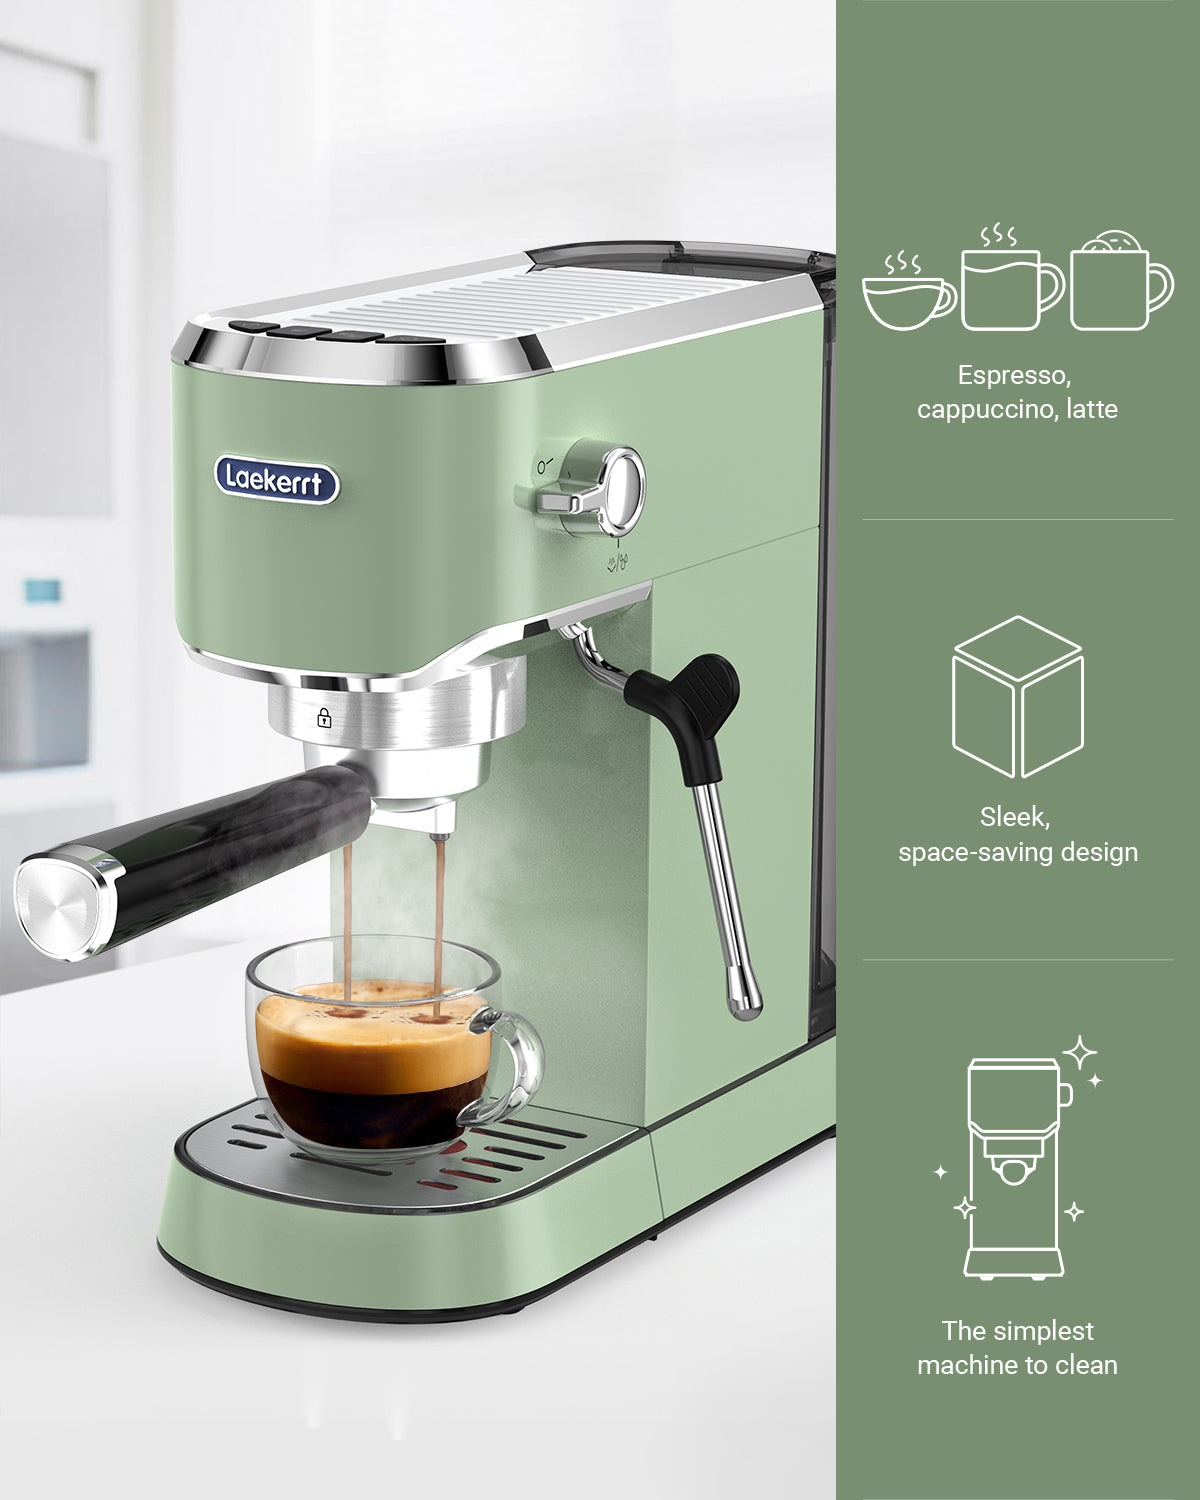 Laekerrt Espresso Machine 20 Bar Espresso Maker CMEP02 with Milk Frother Steam Wand, Retro Home Expresso Coffee Machine for Cappuccino and Latte (Green) Gift for Coffee Lovers, Mom, Friend, Family